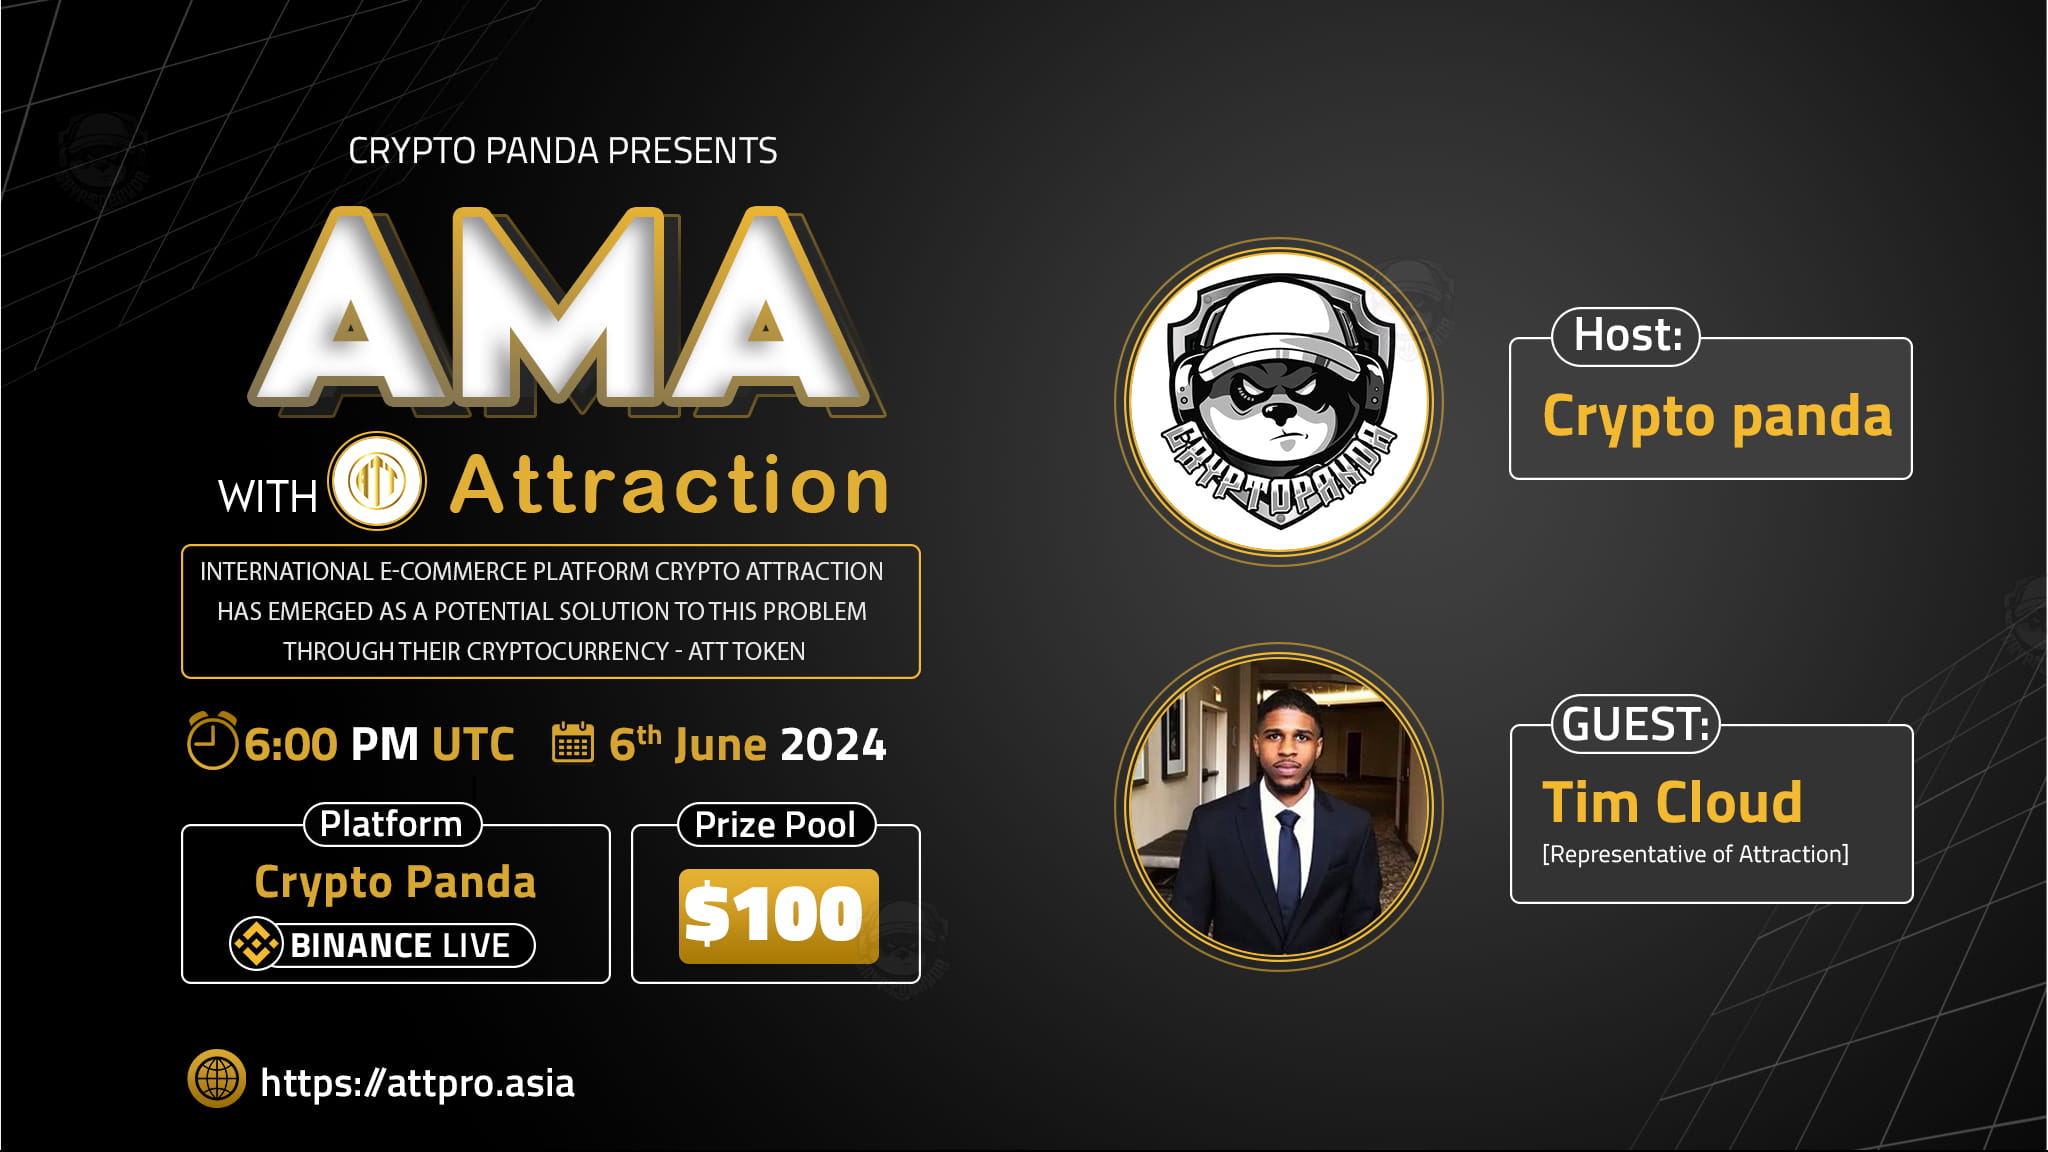 Crypto Panda presents AMA with Attraction